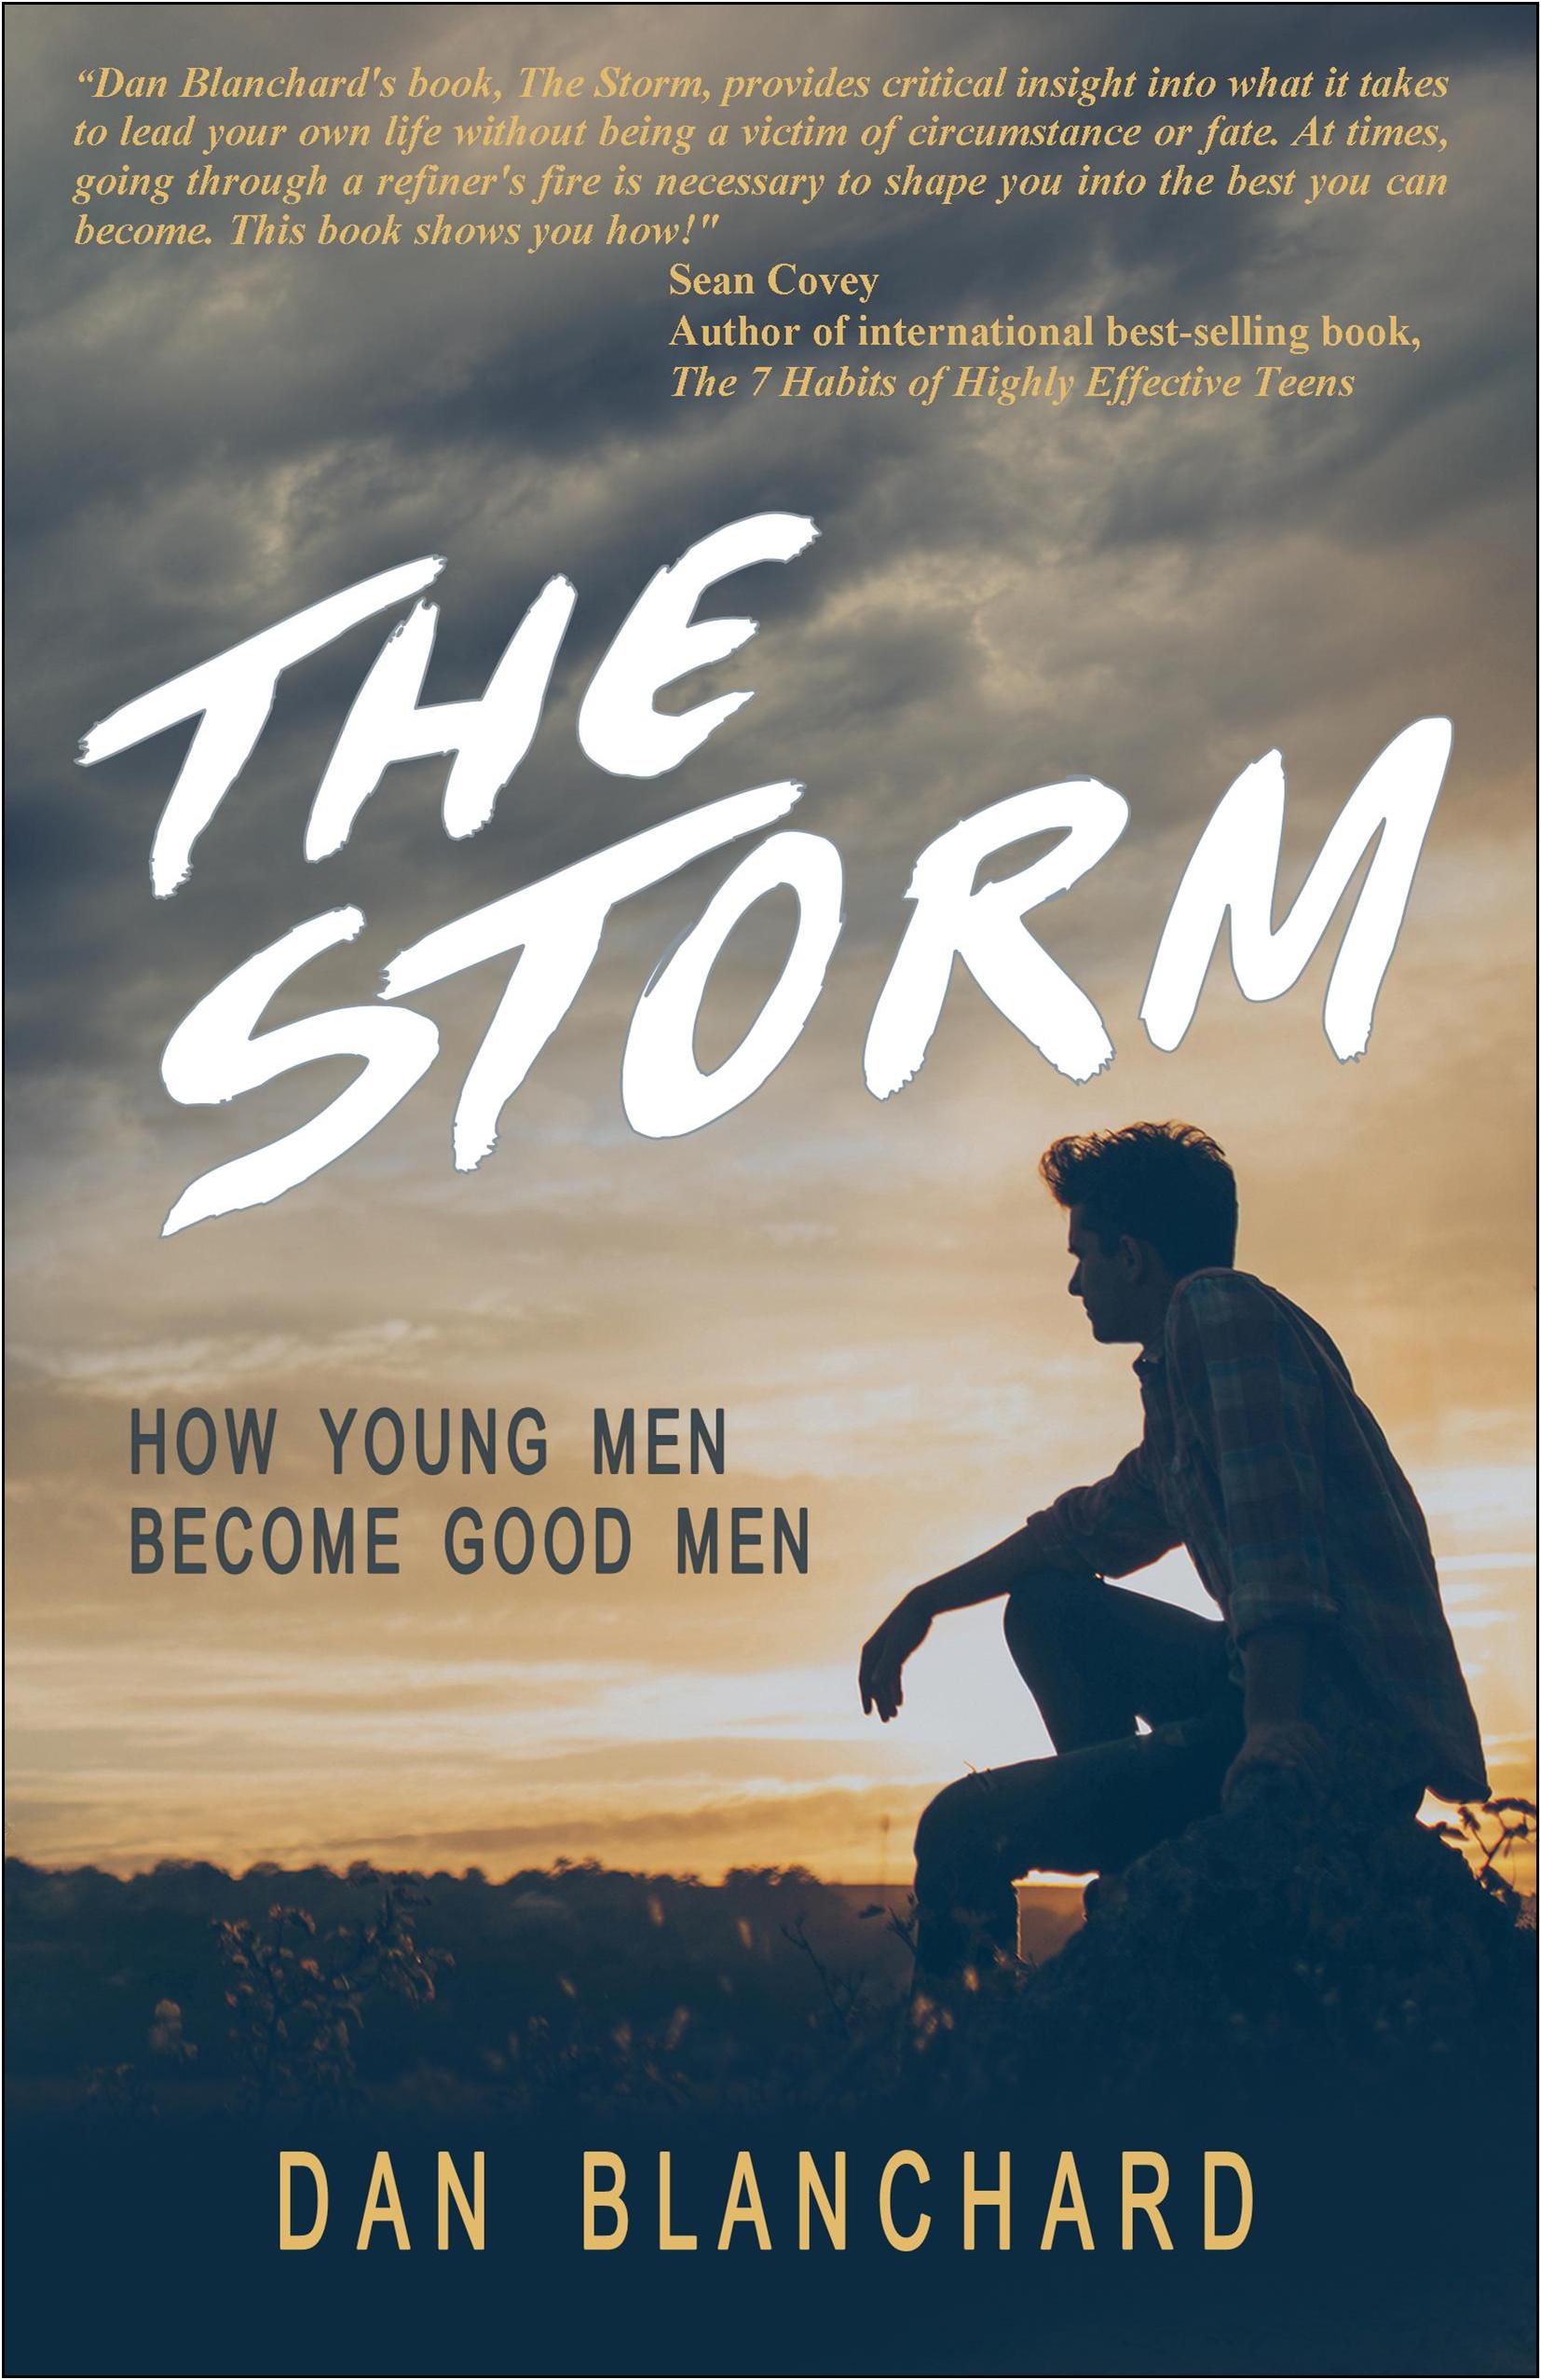 FREE: The Storm: How Young Men Become Good Men by Dan Blanchard by Daniel Blanchard